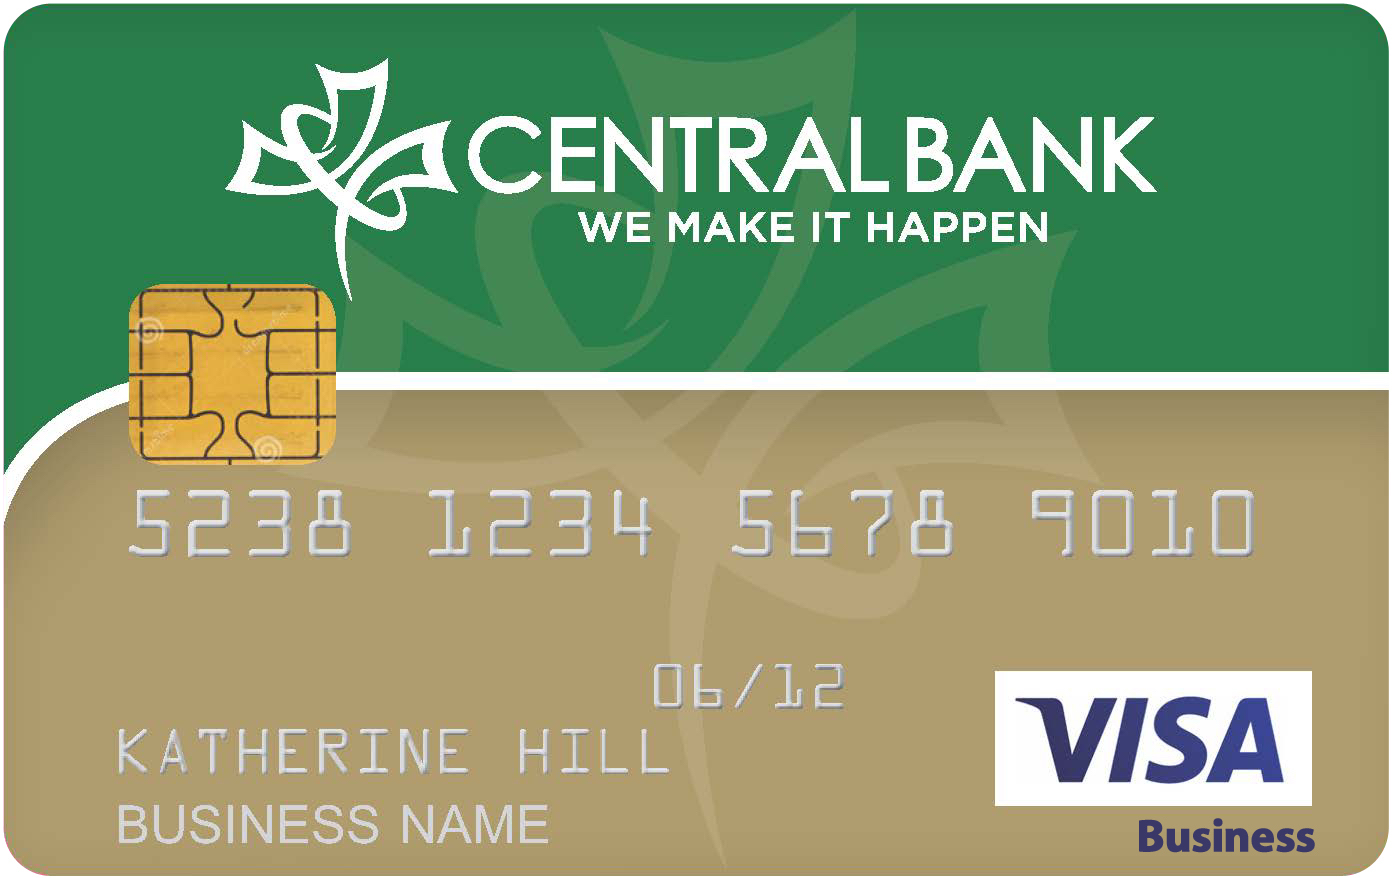 New business, personal credit card options offer valuable benefits with local service ...